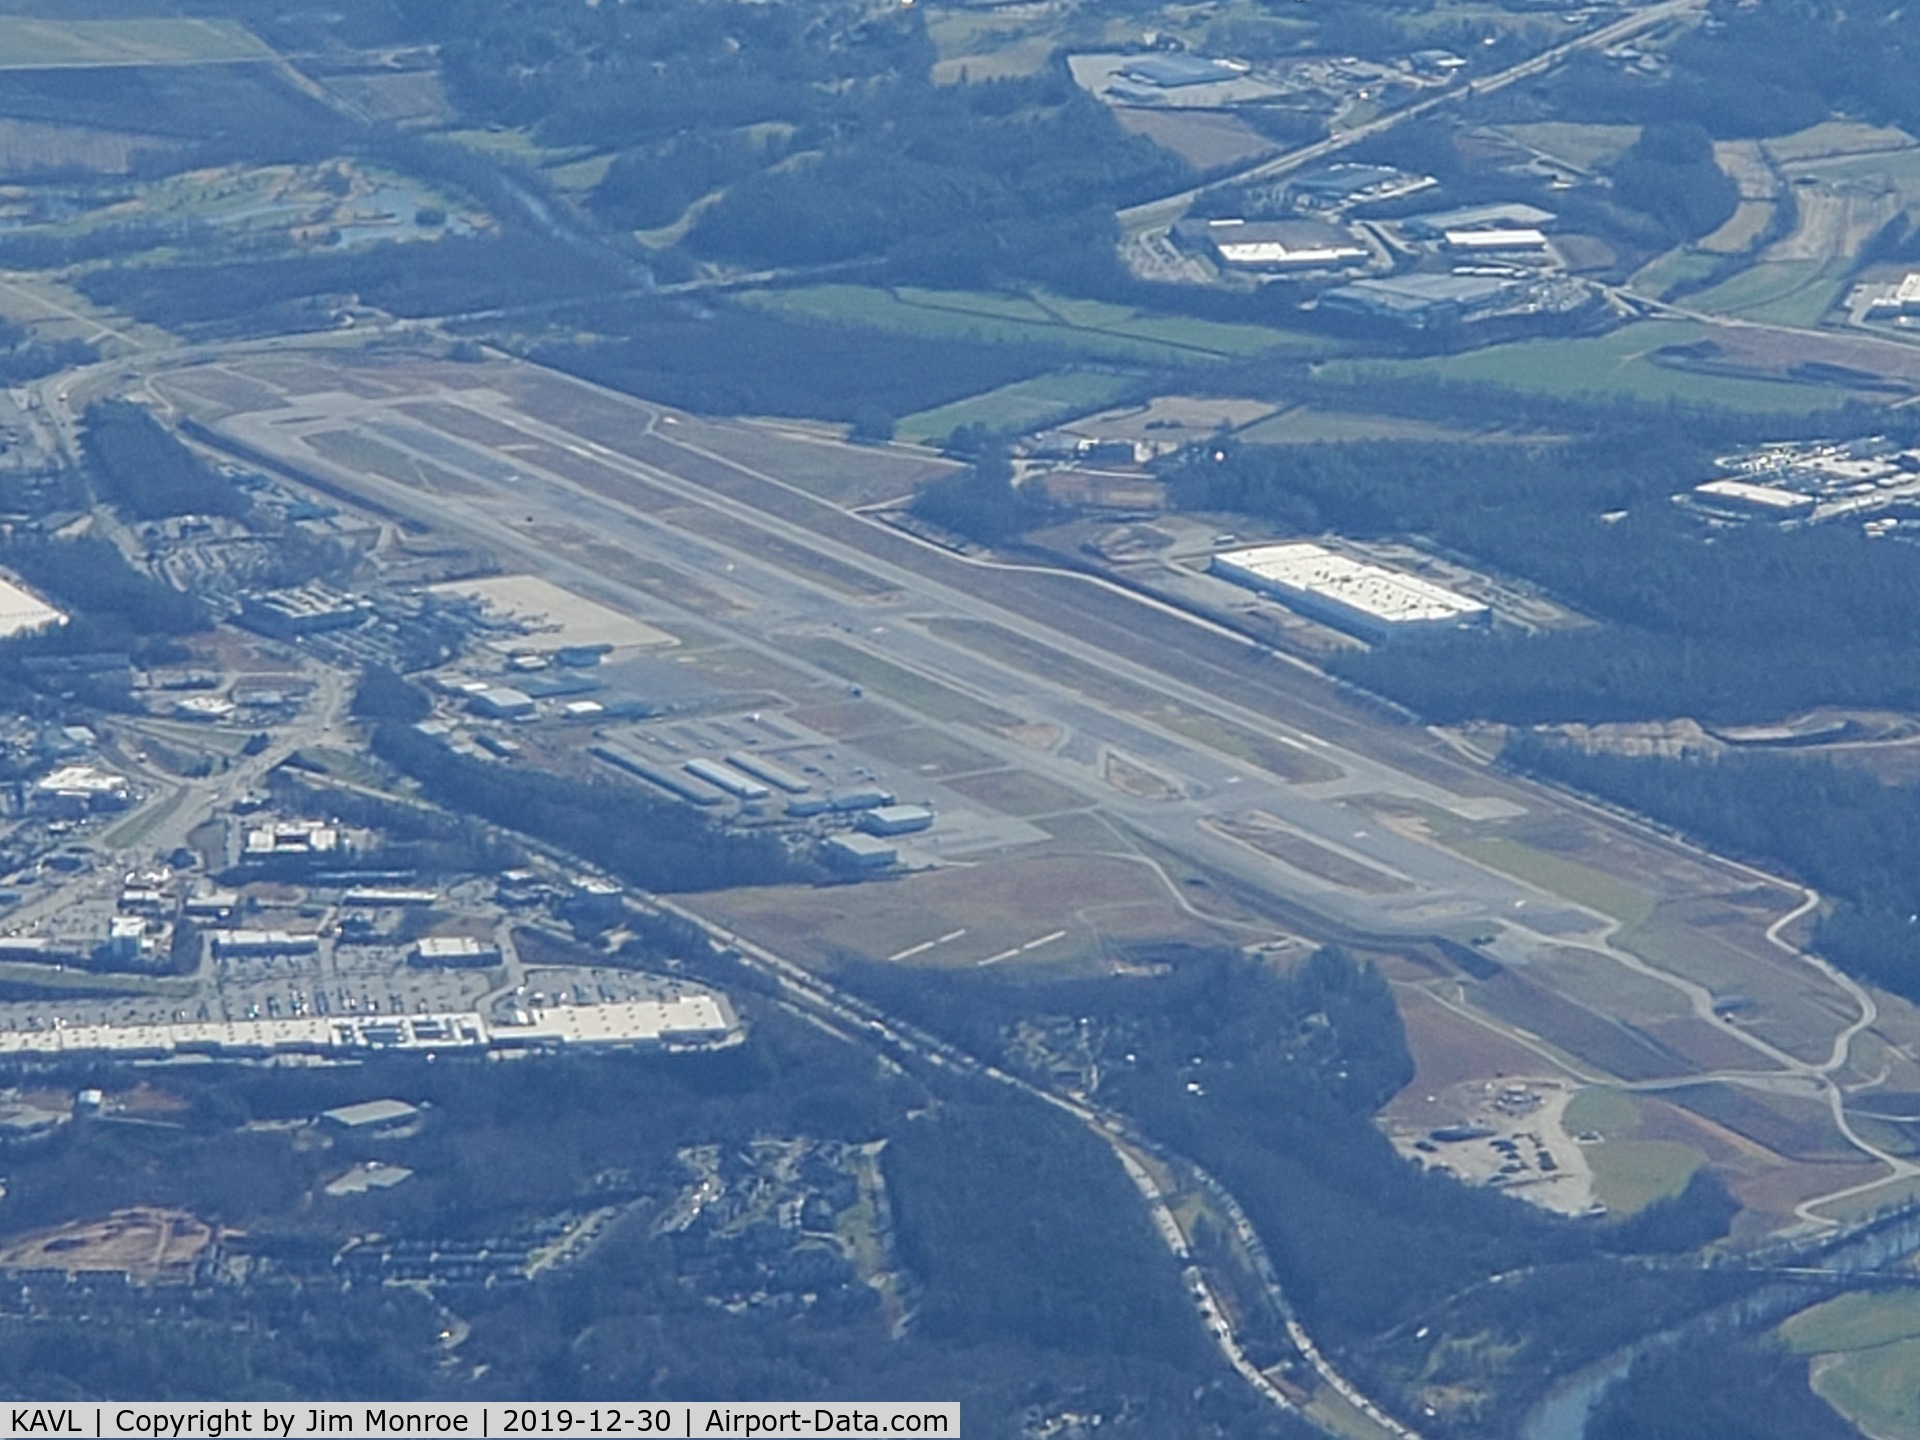 Asheville Regional Airport (AVL) - From 10,000 feet MSL looking south. The FAA determined that the runway was too close to the taxiway. They built a whole new runway (west side), tore up the old runway and built a new one (in the center). This has been in process several years.